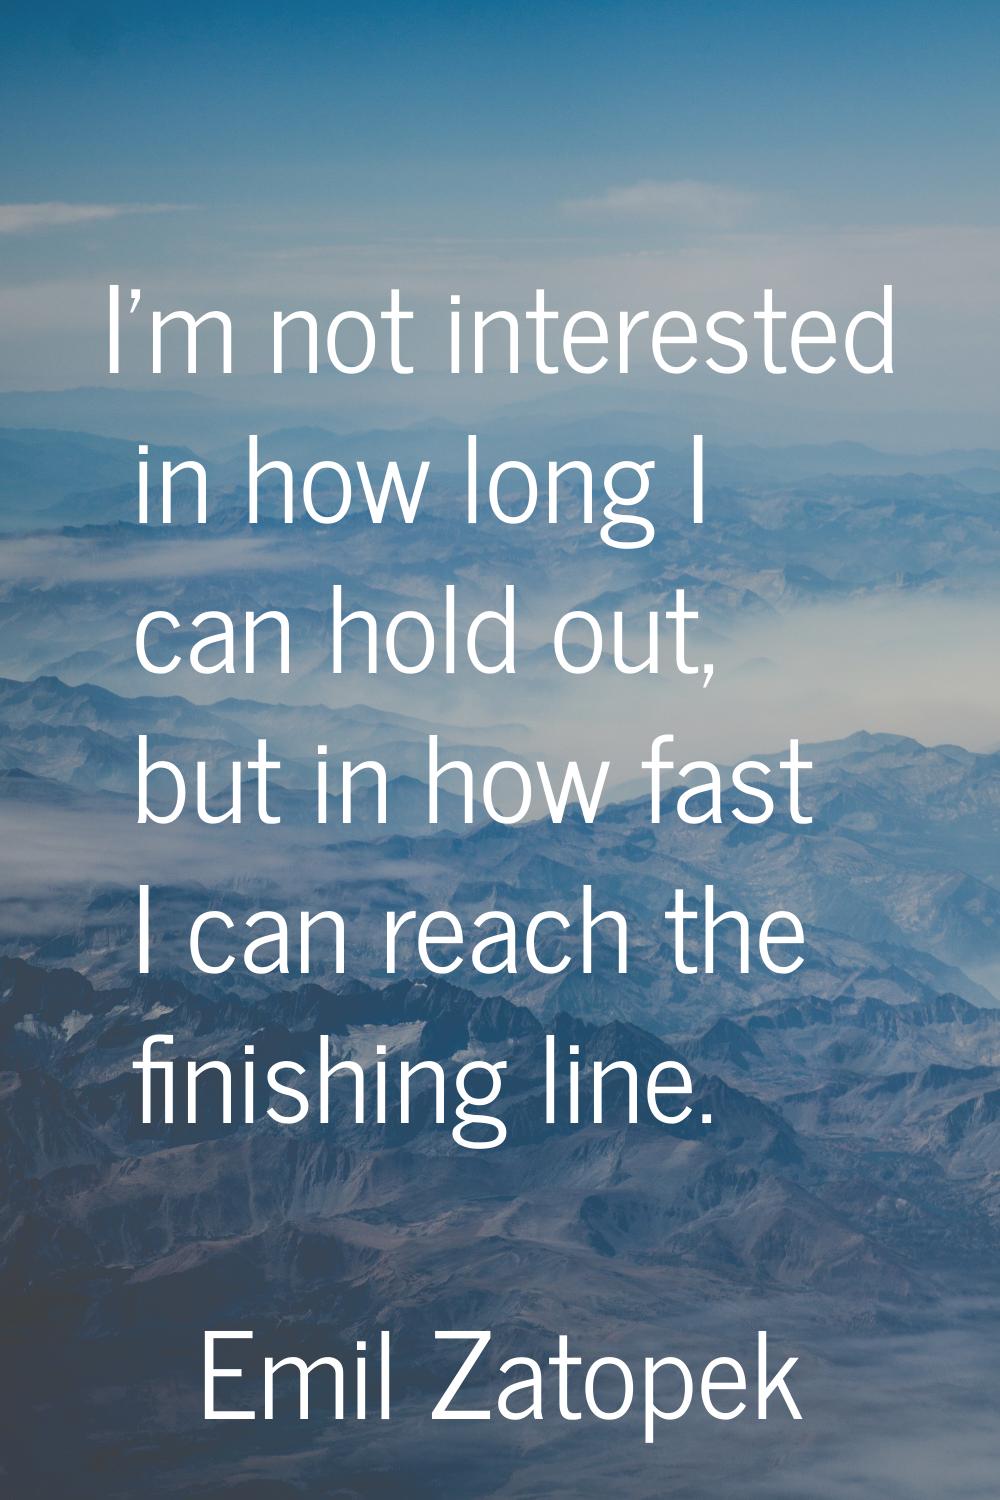 I'm not interested in how long I can hold out, but in how fast I can reach the finishing line.